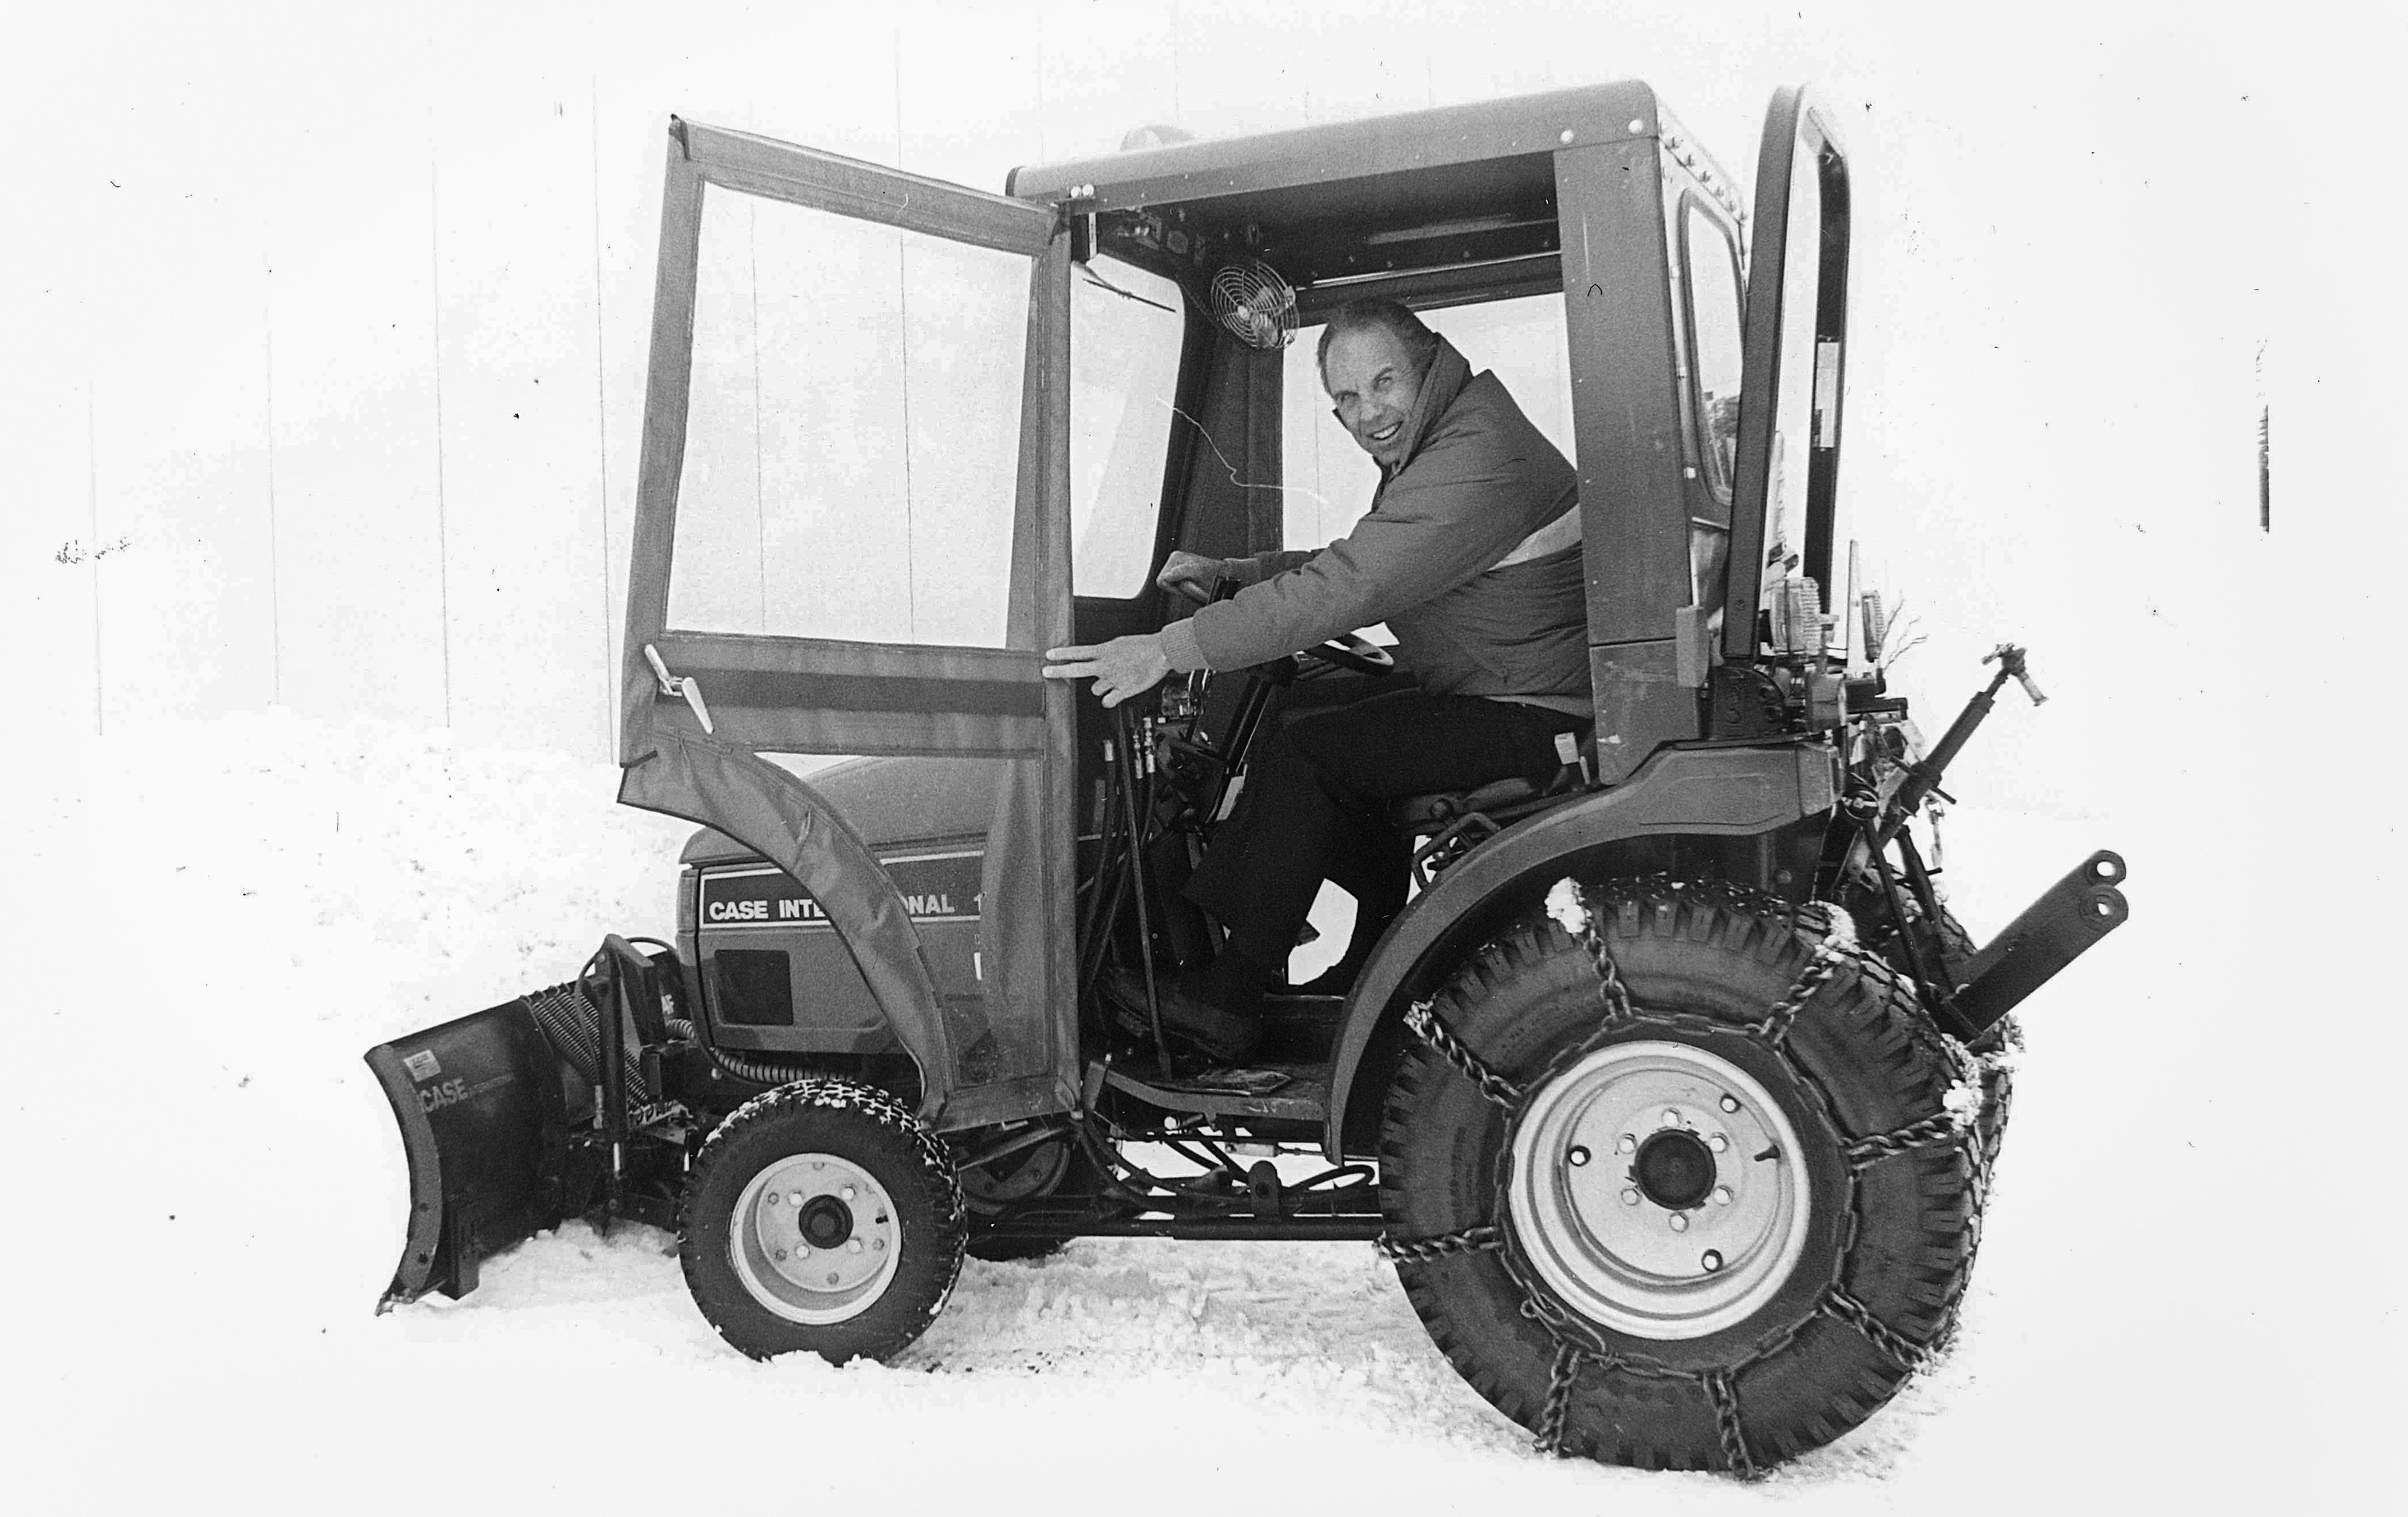 Cazenovia College President Stephen M. Schneeweiss was among staff members at the college who used plows to help the campus dig out from the Blizzard of '93. The March 13-14 storm dumped more than 3 feet of snow on the campus and forced the college to cancel classes March 15.